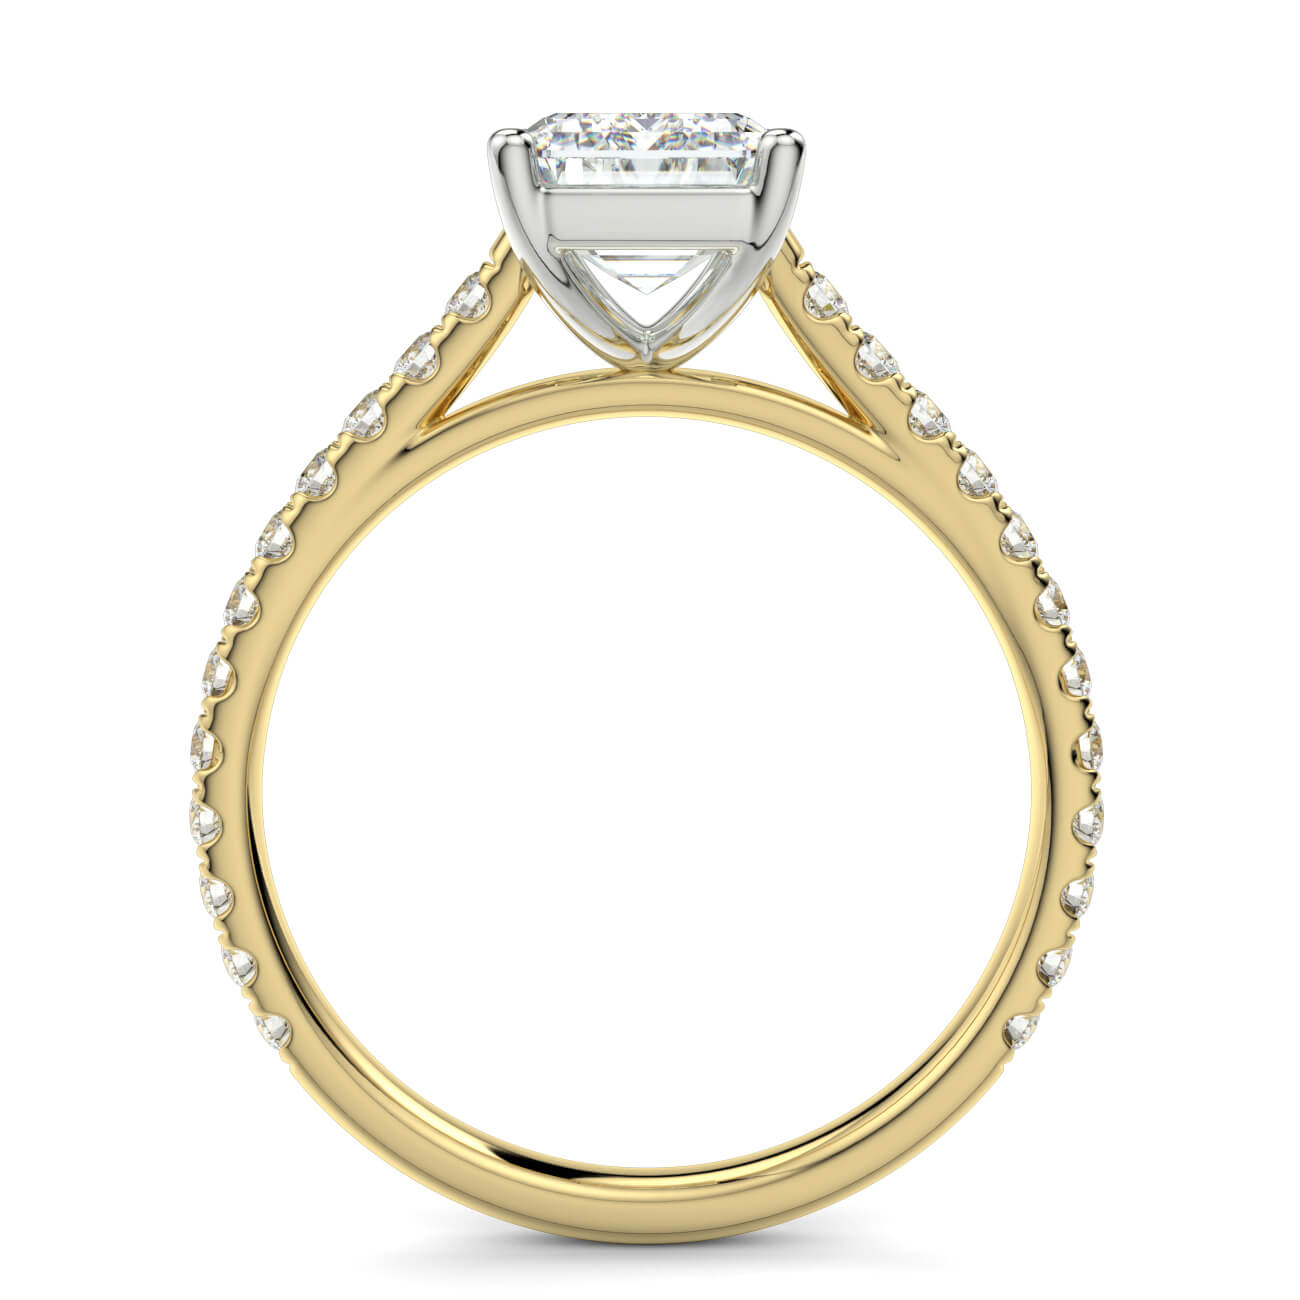 Emerald Cut diamond cathedral engagement ring in yellow and white gold – Australian Diamond Network